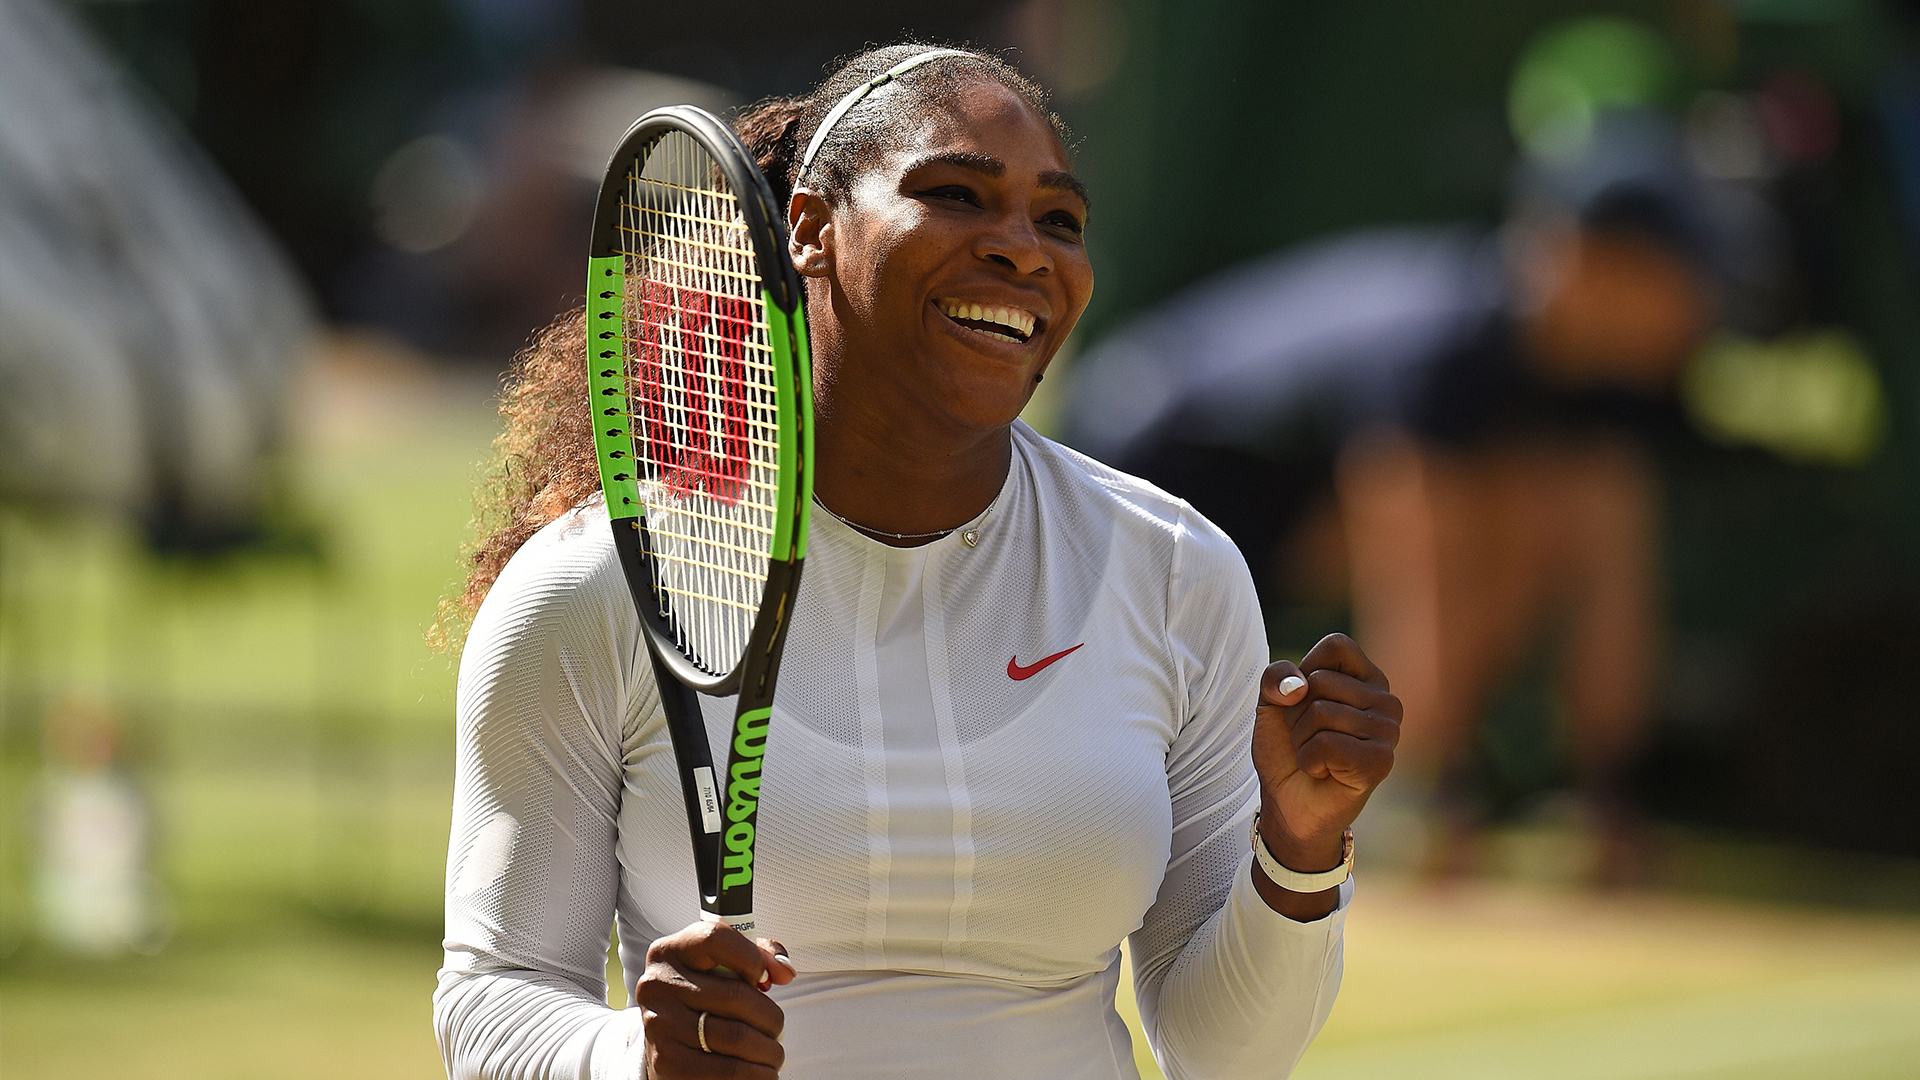 Wimbledon 2018: As Serena Williams chases her 24th Grand Slam, her legacy  as the greatest of all time is already secure